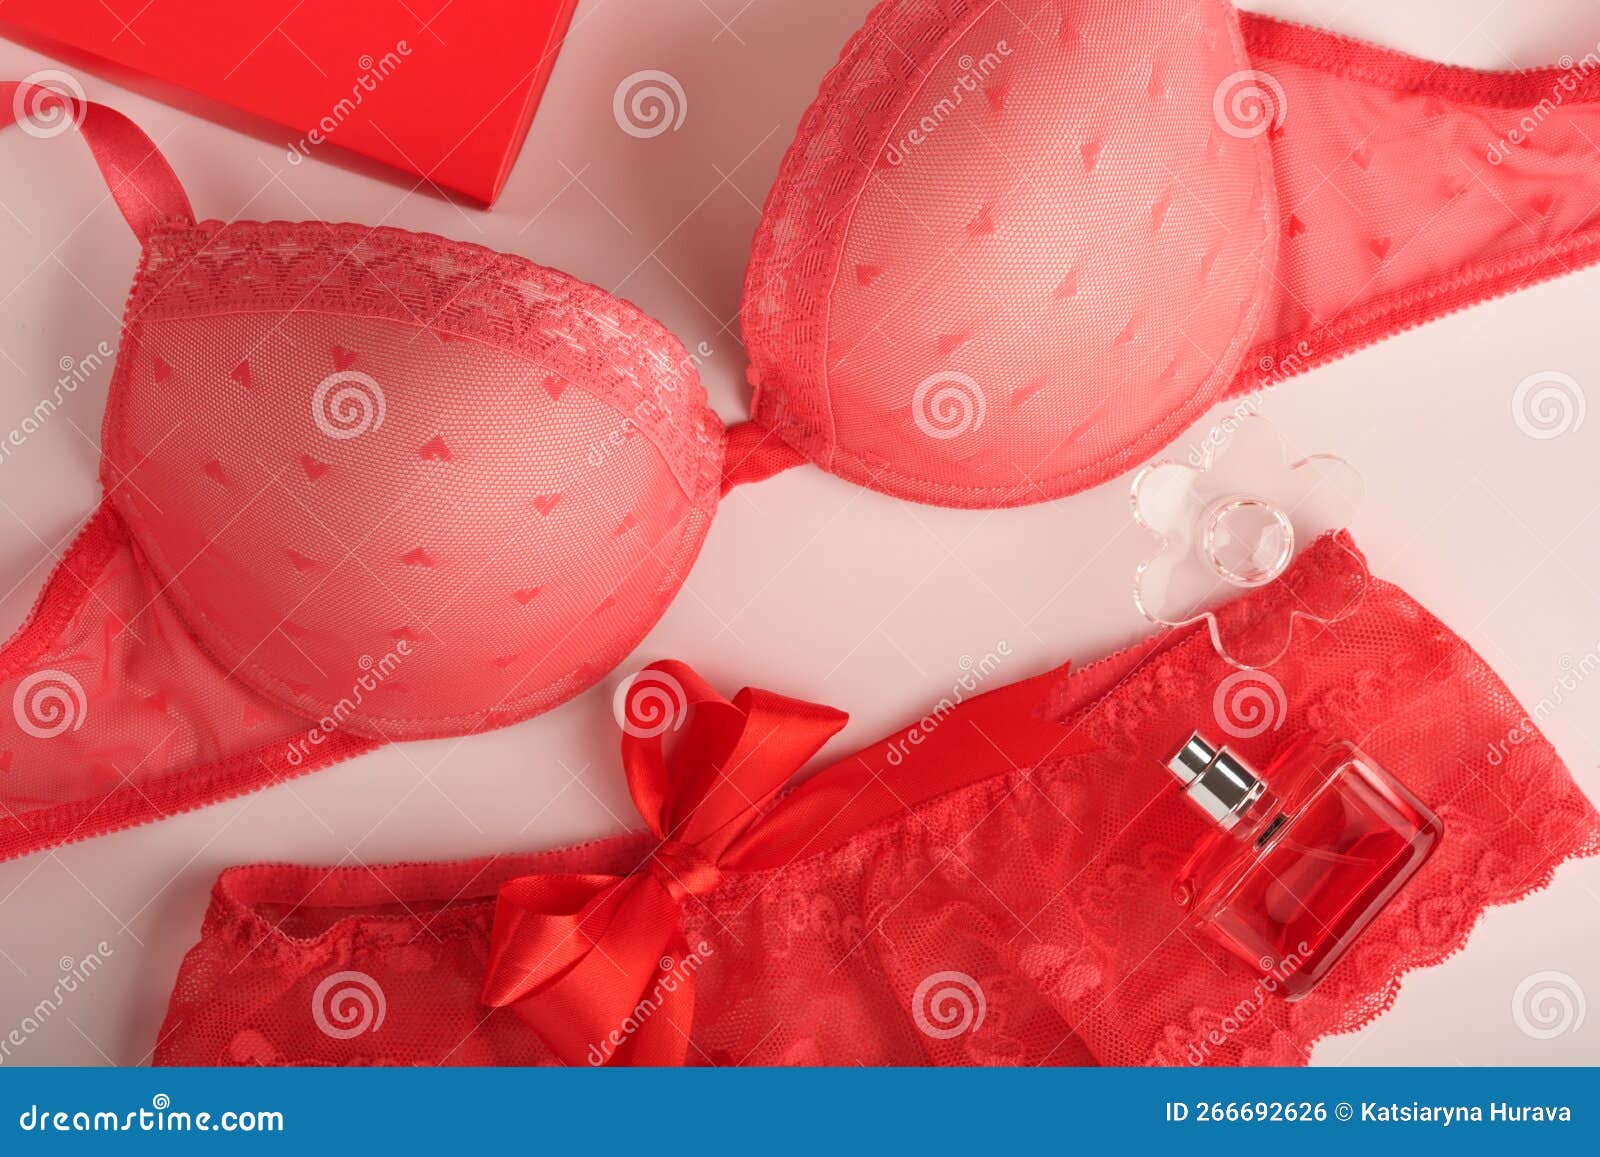 Red Bra and Panties on Pink Background. Women Underwear Set with